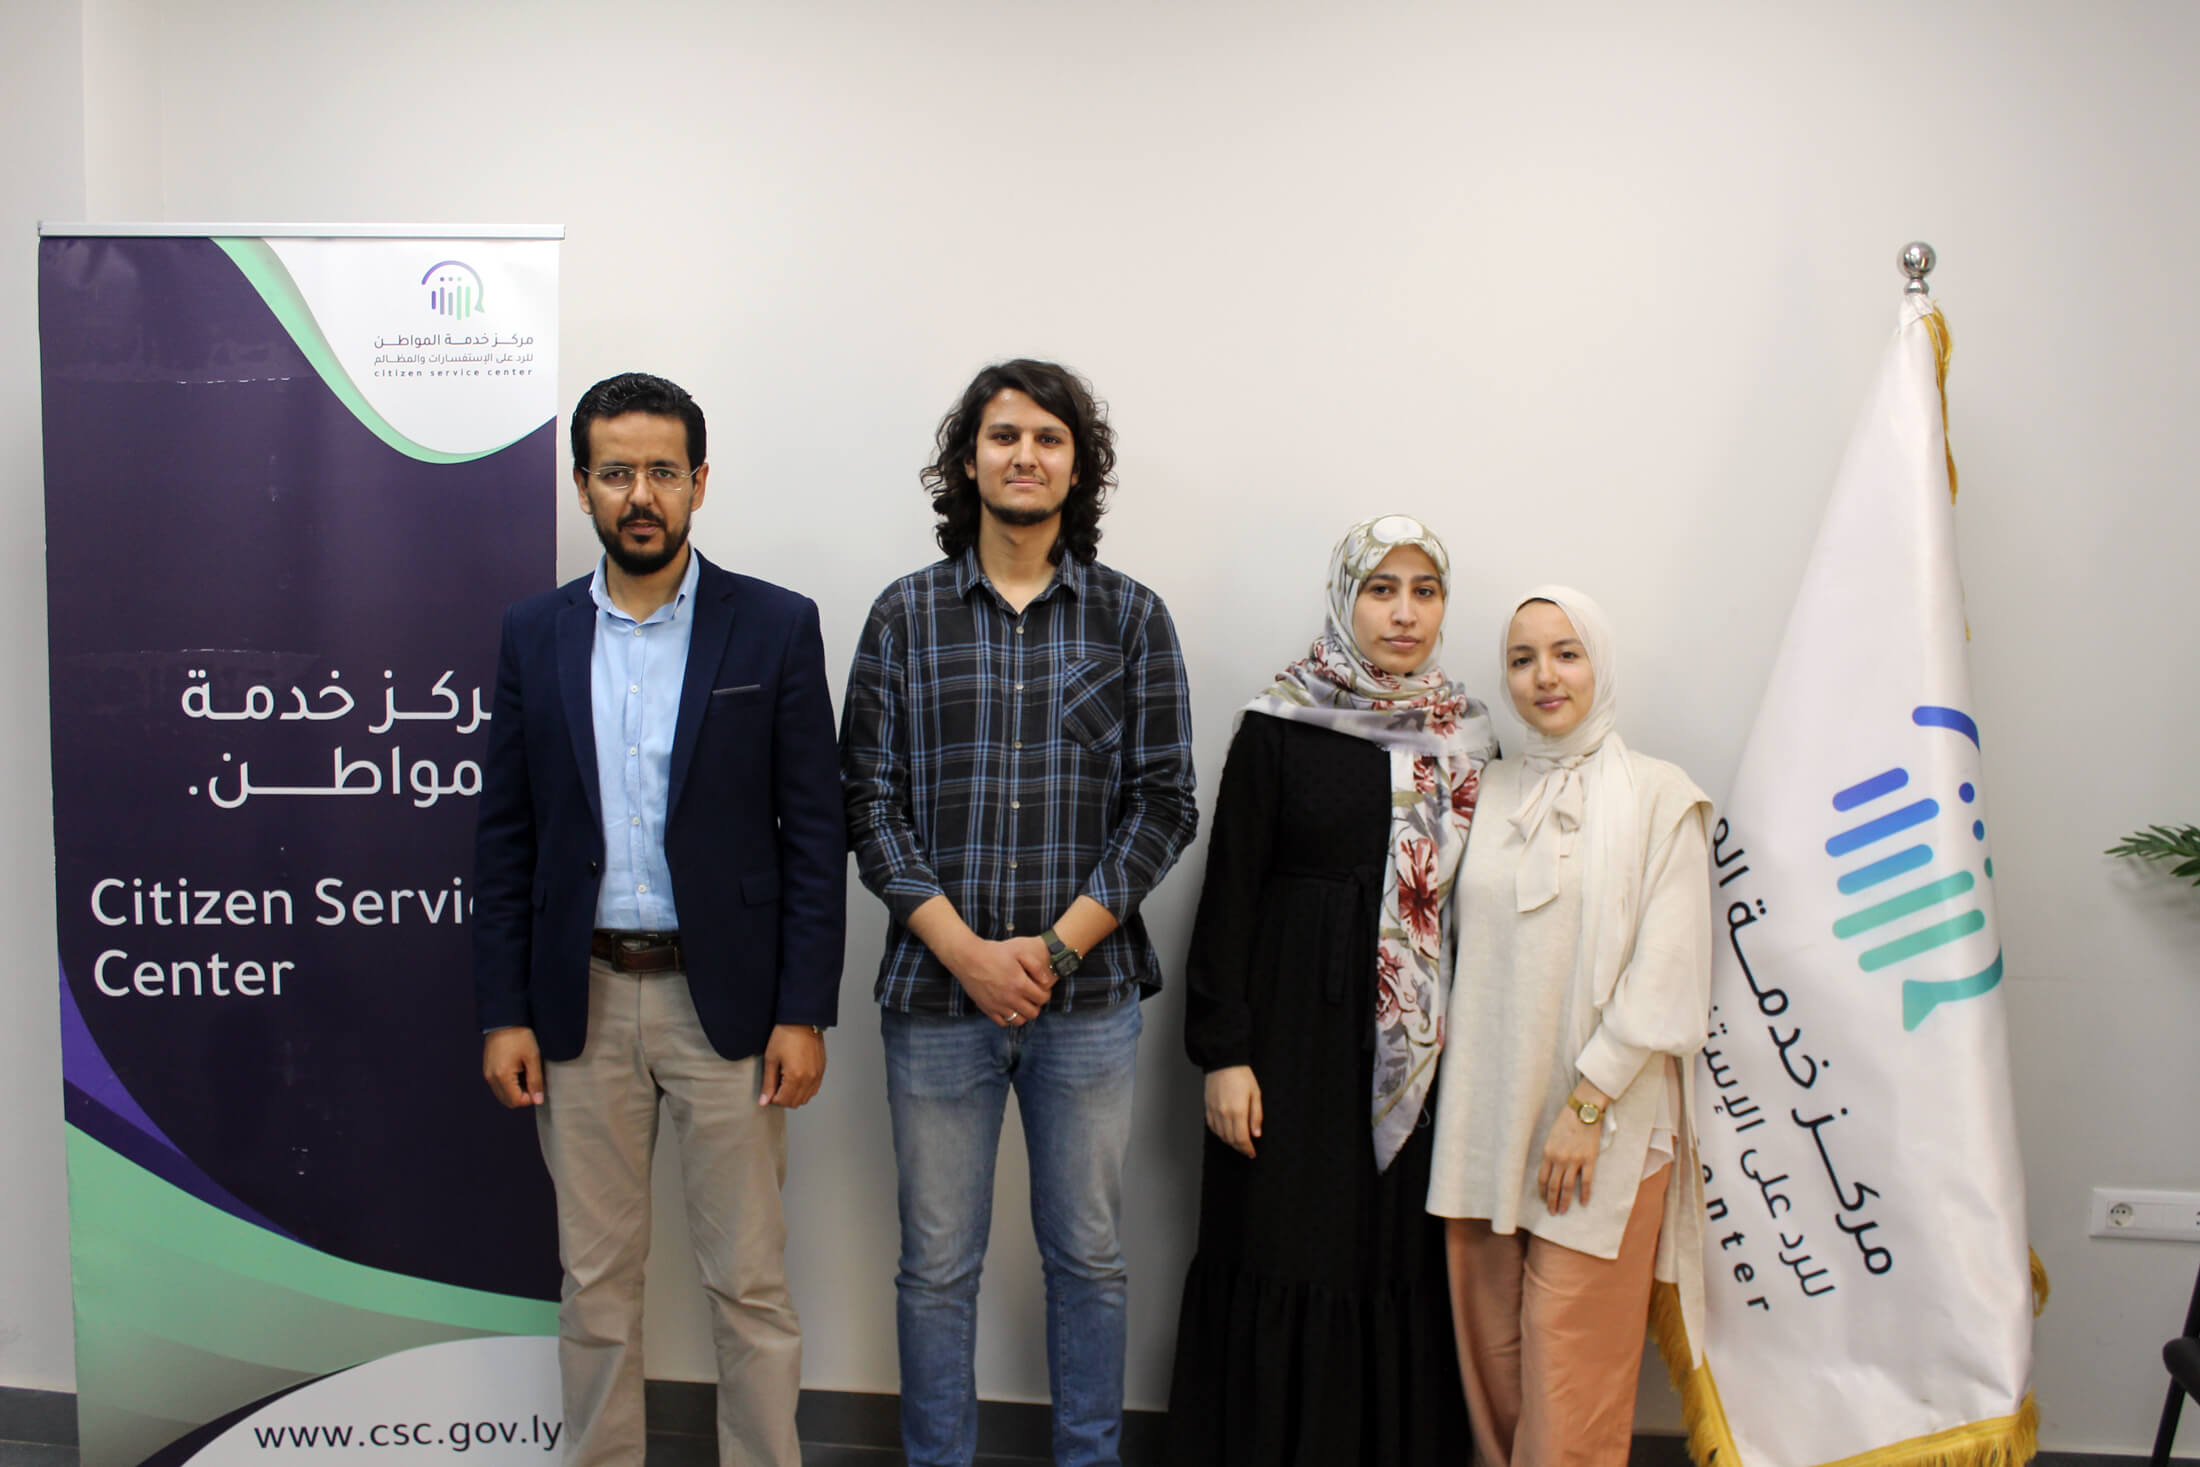 A few of our mental health counselors in Libya join Walid Alfitouri (left), Director of Administration at Citizen Service Center, for a photo.